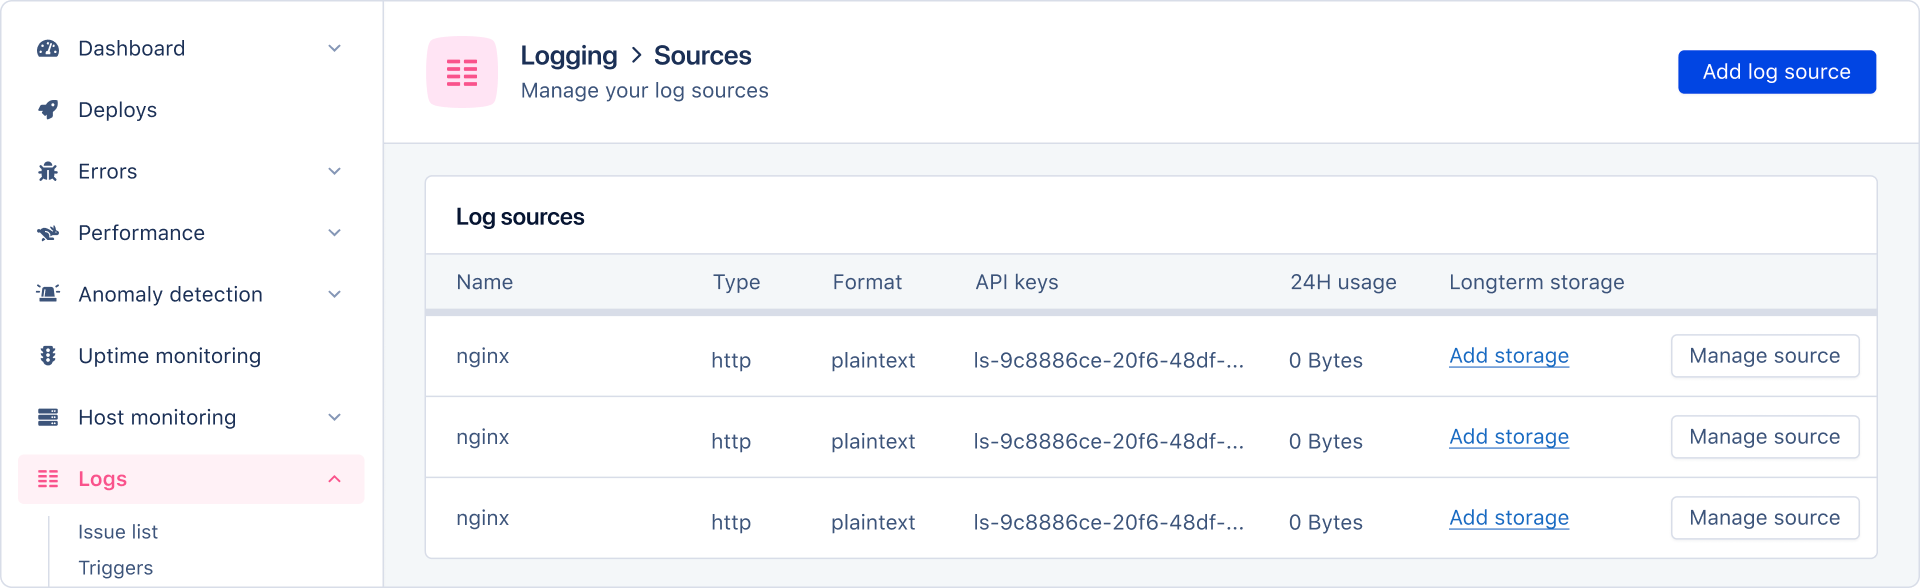 Image of log sources with Add source link